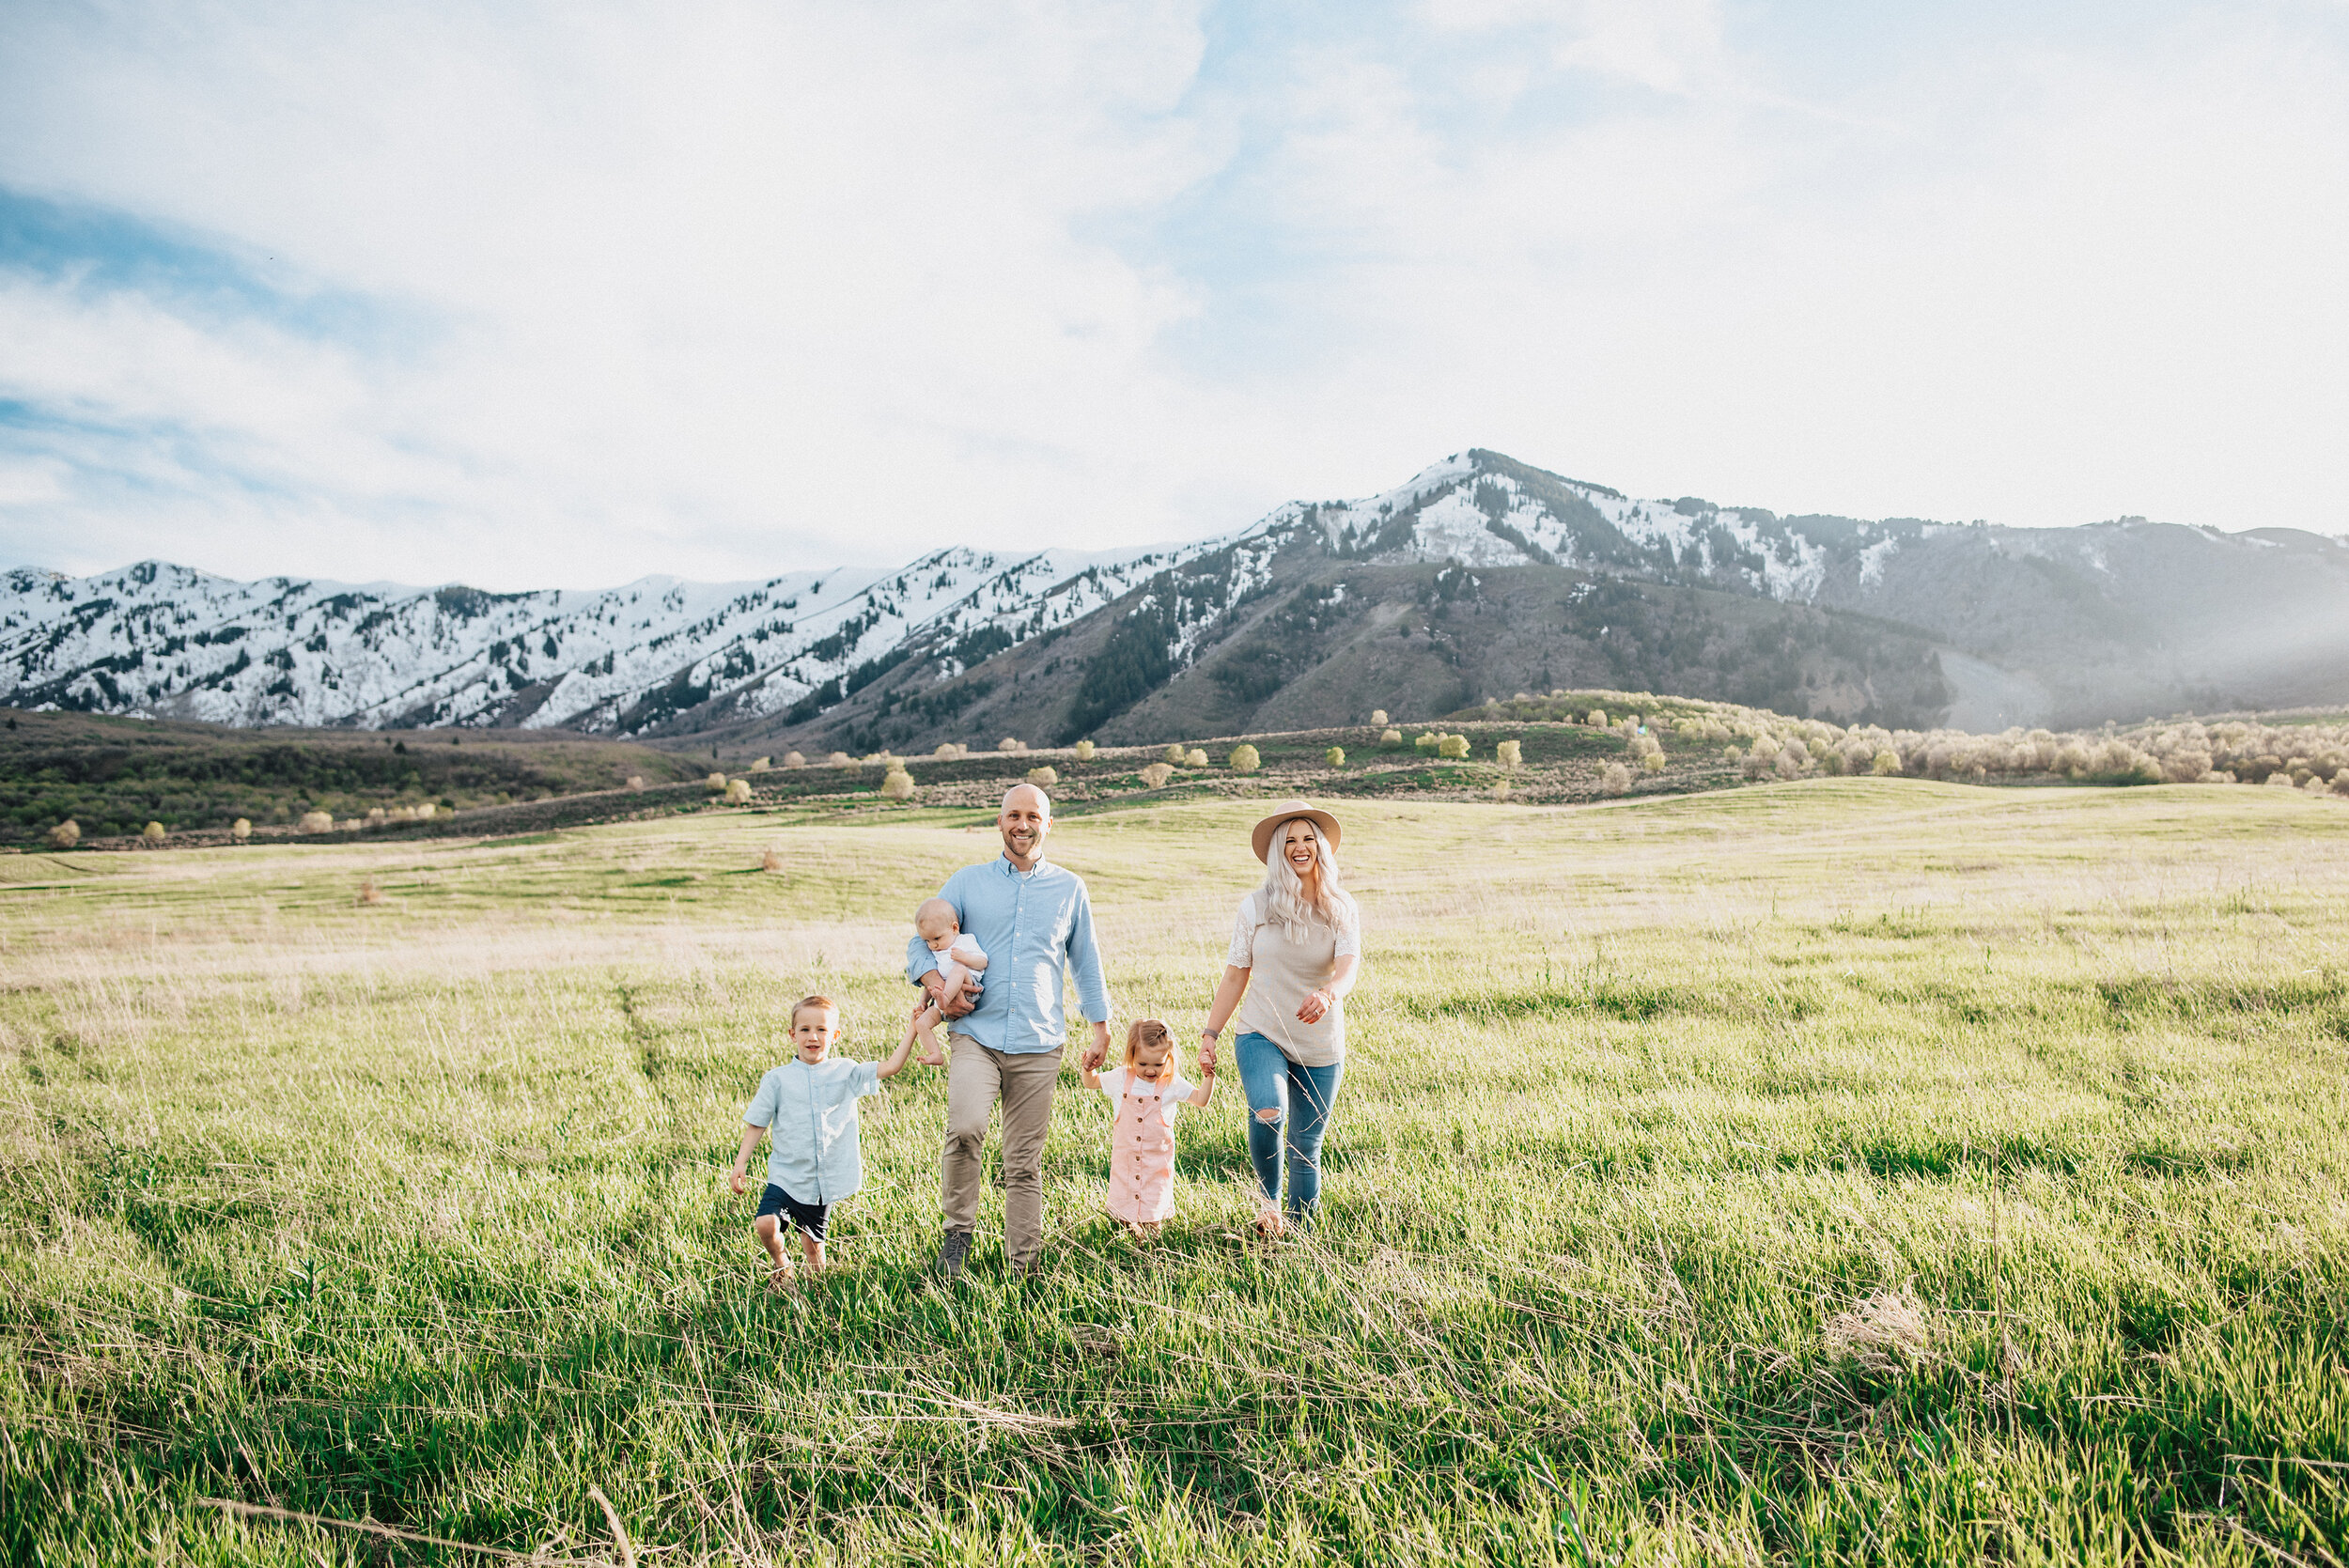  Family of five stands in the middle of a meadow in the wellsville mountains near logan utah. Happy family posing in mountain utah photography holding hands picture kristi alyse photographer family photography mountain family photography locations logan utah #familylove #familyfun #familyday #familyfunday #familytimes #familyselfie #familybond #happyfamily #instafamily #familygram 